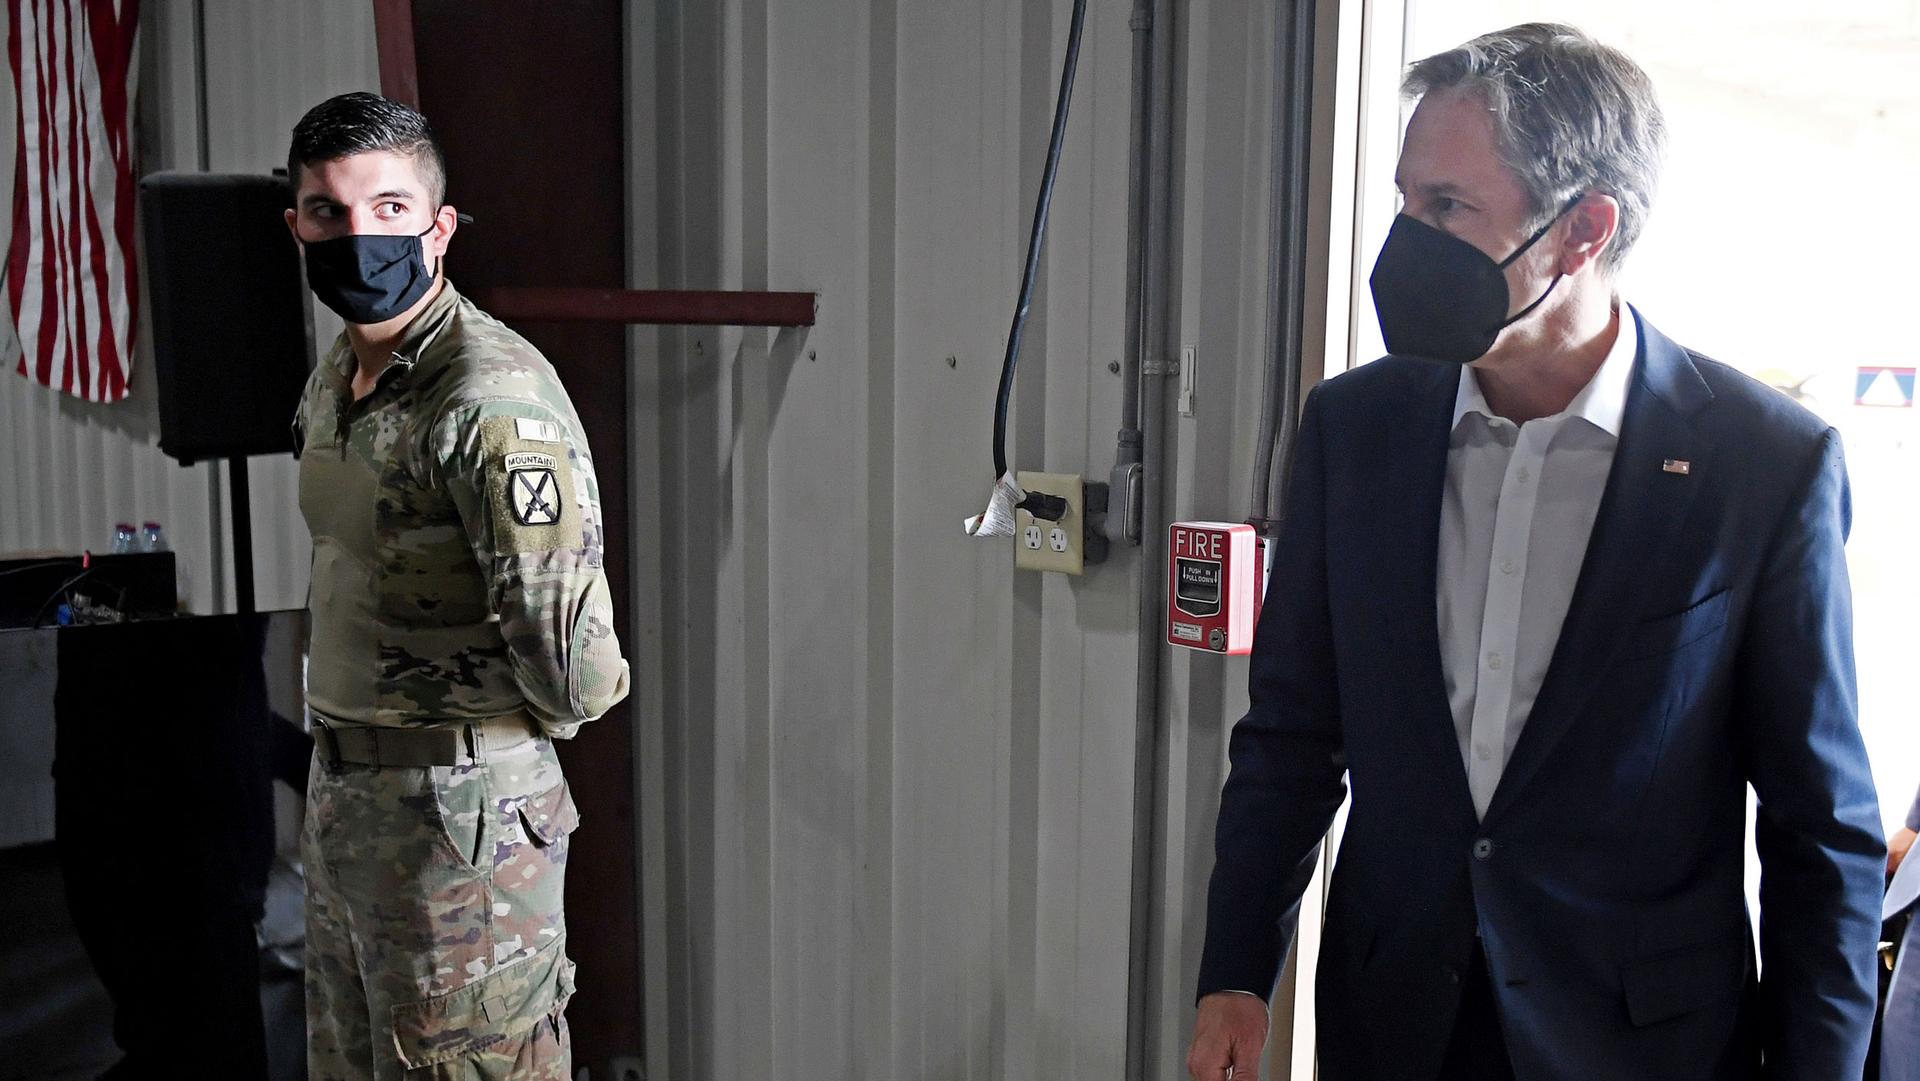 US Secretary of State Antony Blinken is shown looking to his right while walking and wearing a dark face mask with a solider stands in the distance.